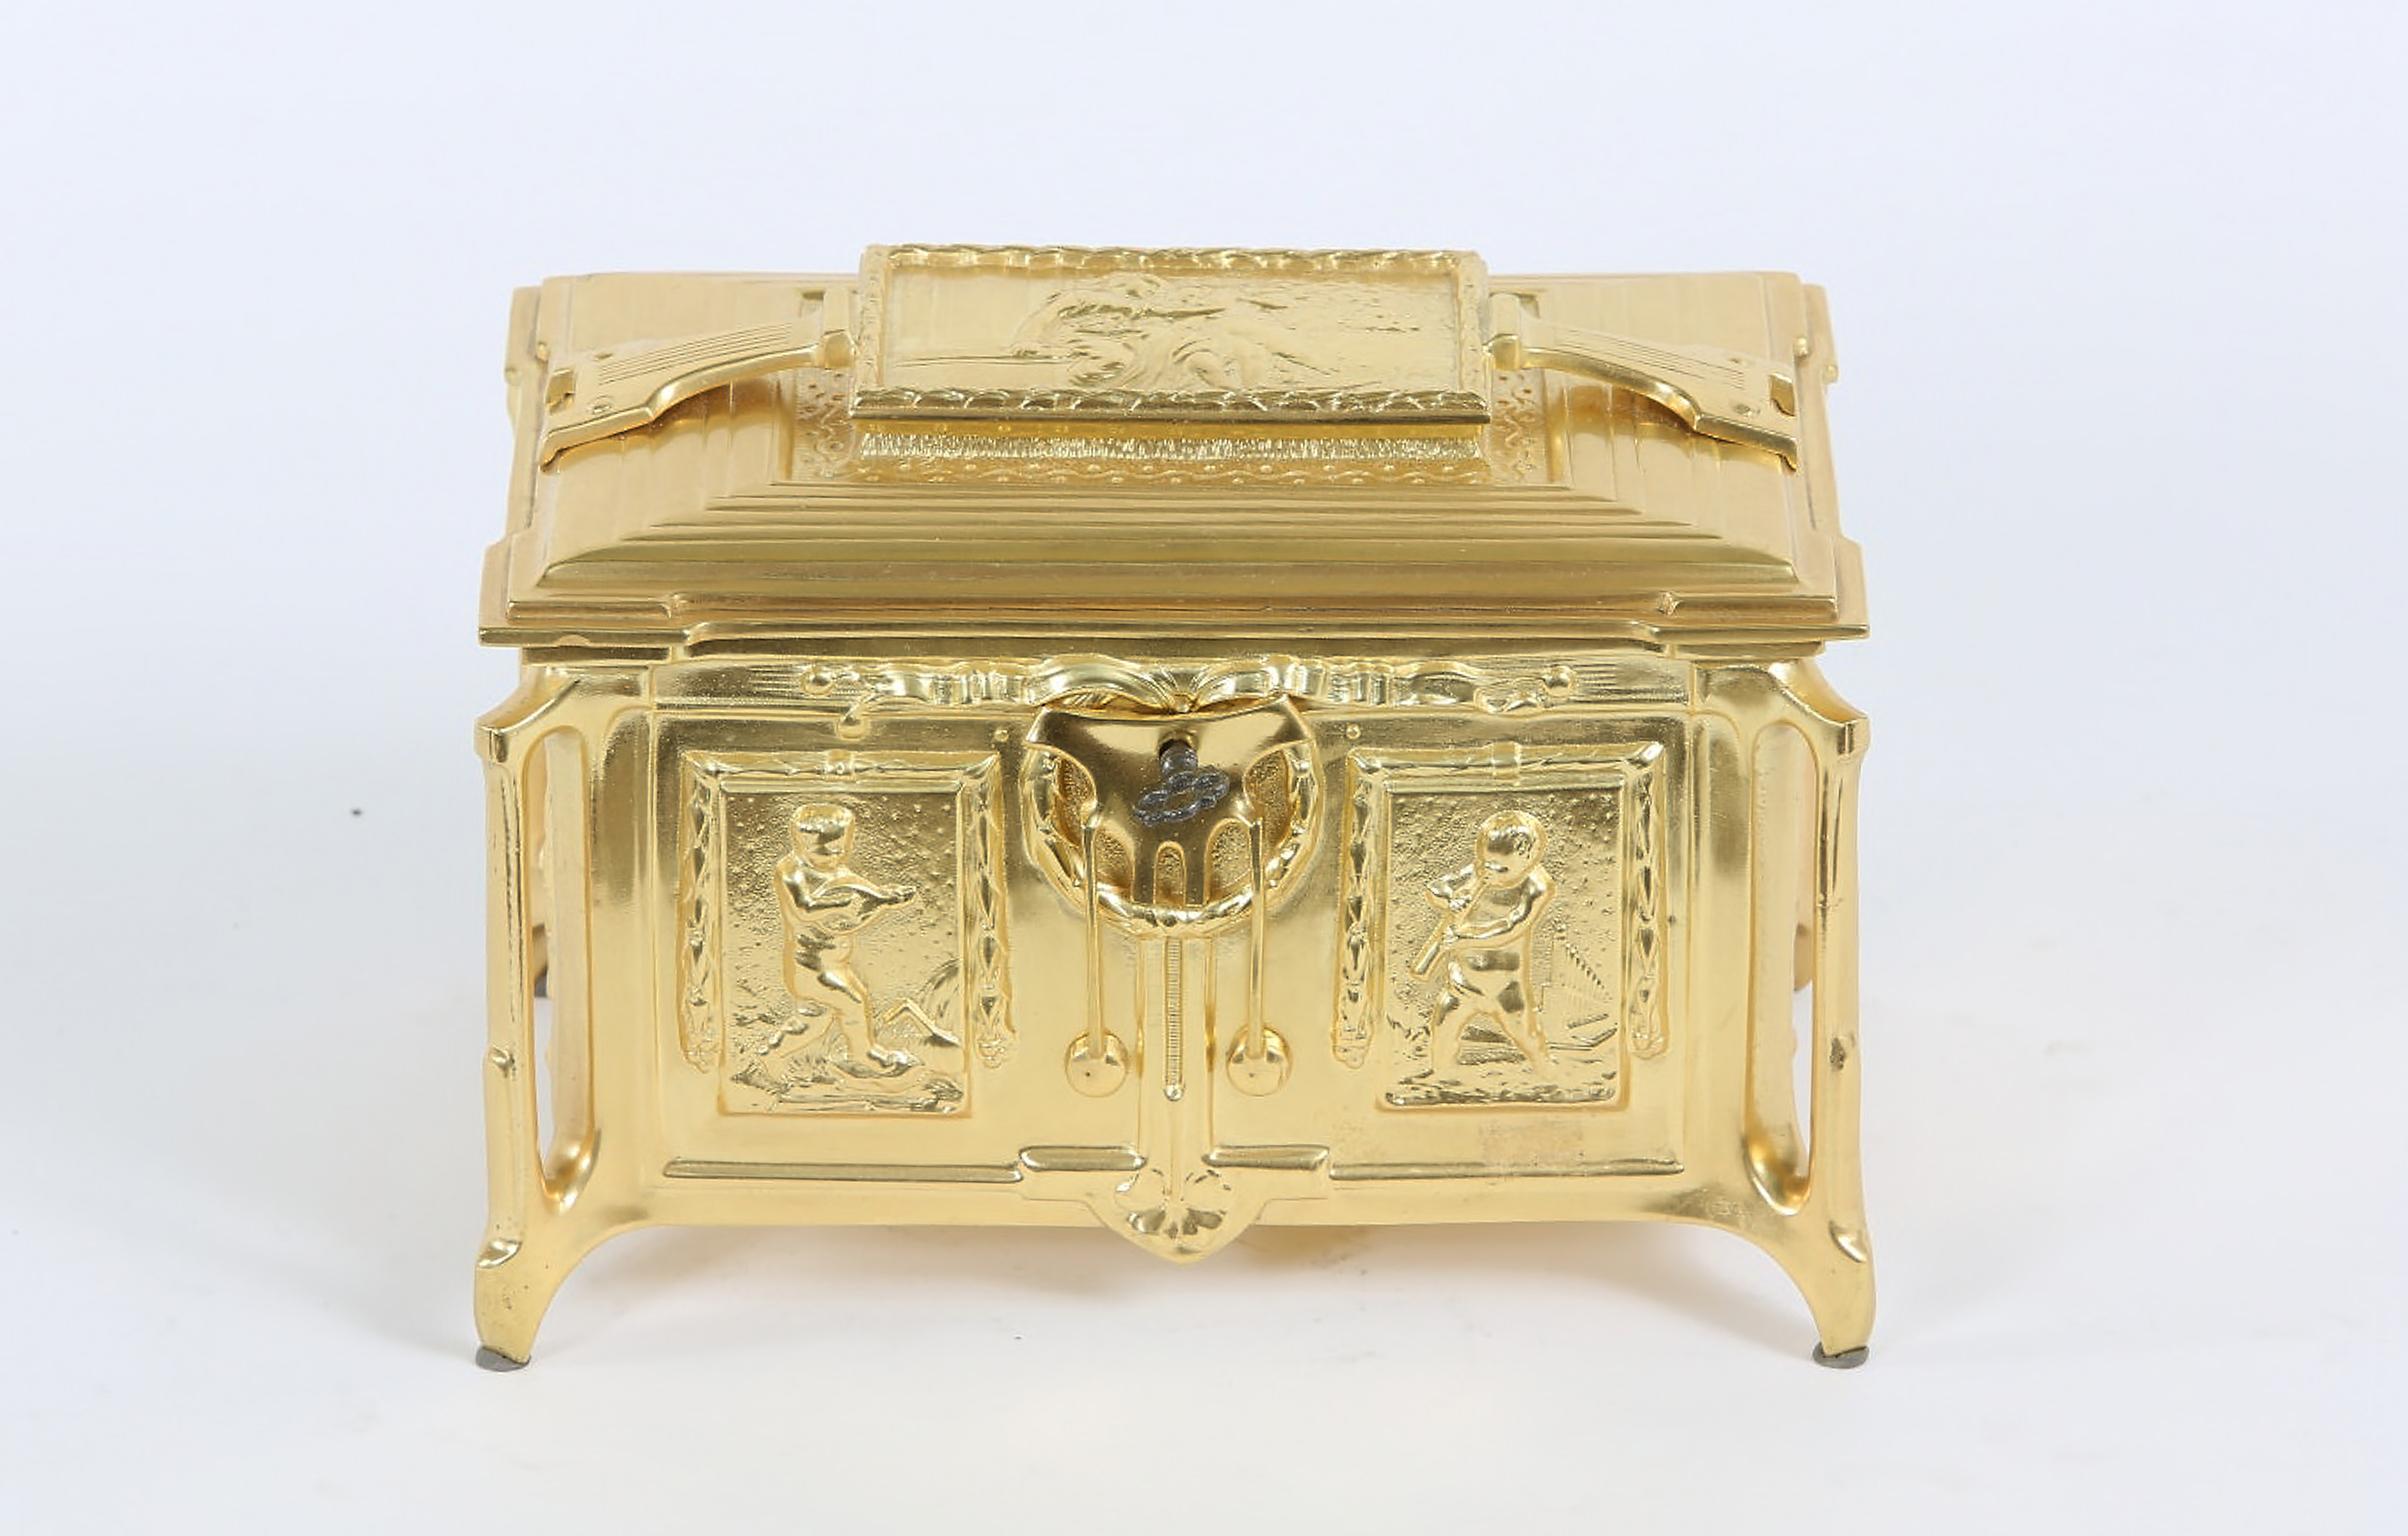 Gilt Dore bronze metal footed covered decorated box with exterior design details and silk interior. Top cover lid with scene of seated lady & putti. Regilded & maker's mark stamped undersigned with front key. The covered box is about 8